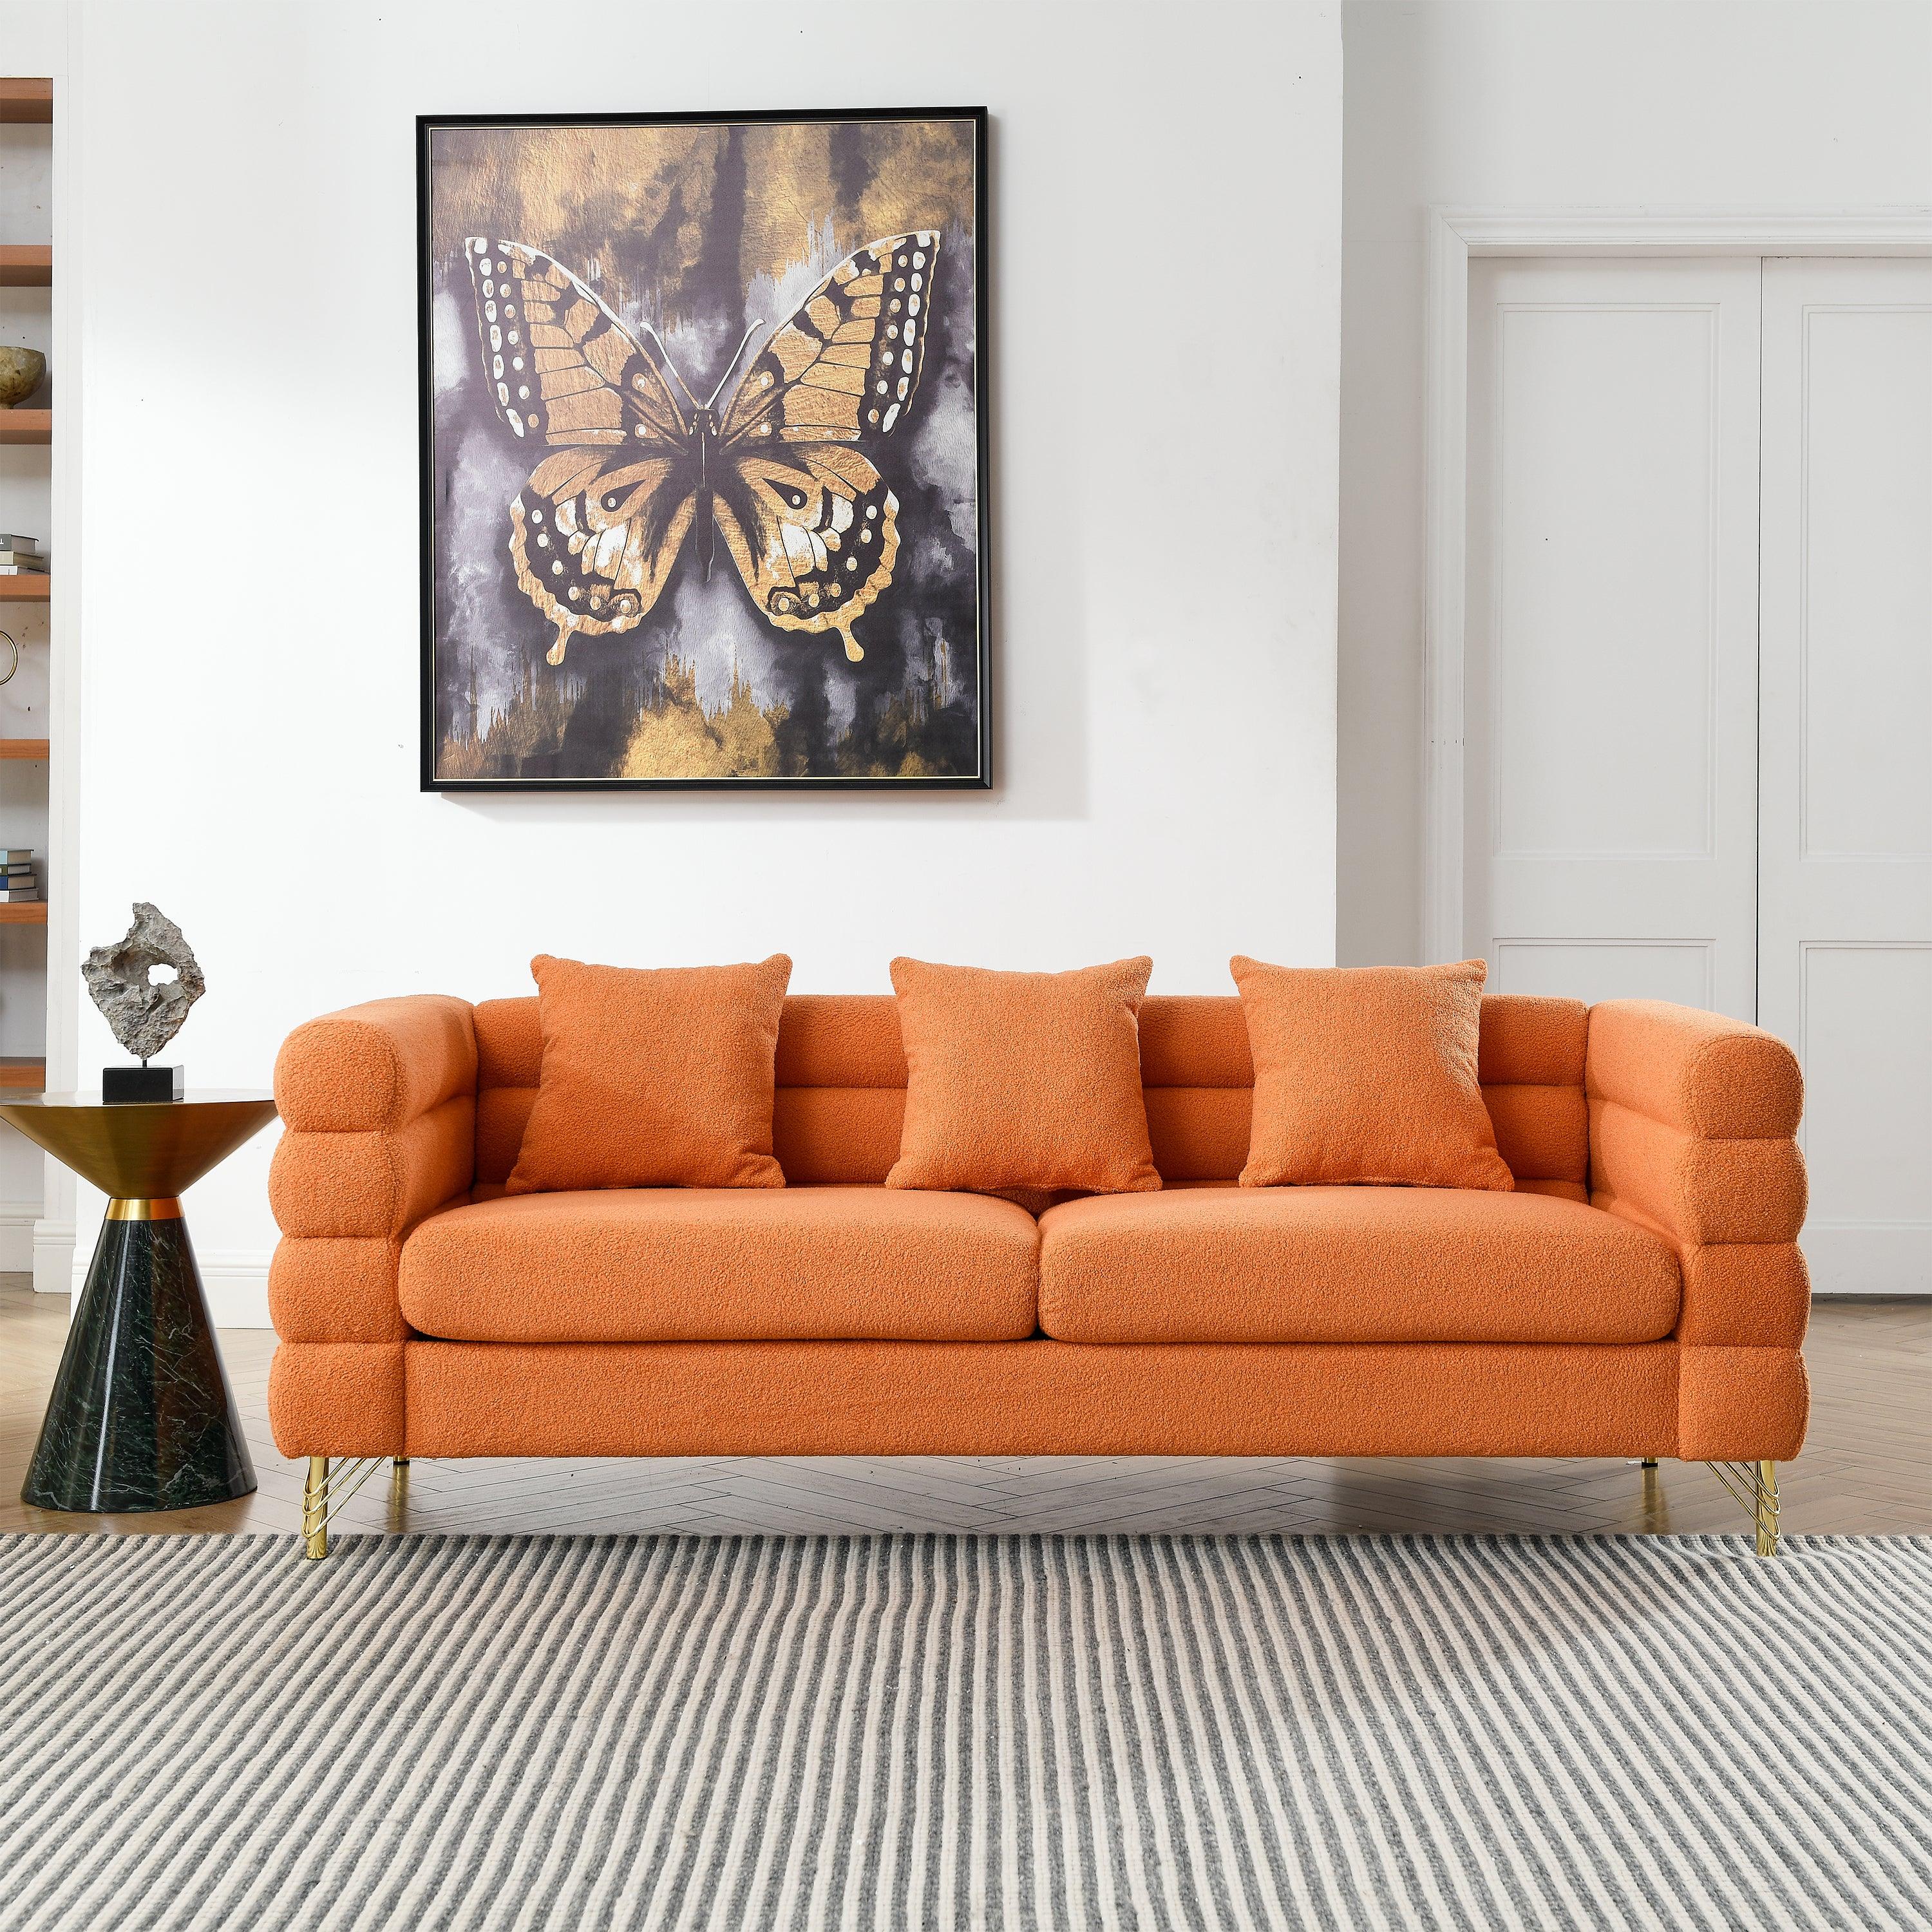 🆓🚛 81" Oversized 3 Seater Sectional Sofa, Living Room Comfort Fabric Sectional Sofa-Deep Seating Sectional Sofa, Soft Sitting With 3 Pillows for Living Room, Bedroom, Office, Orange Teddy